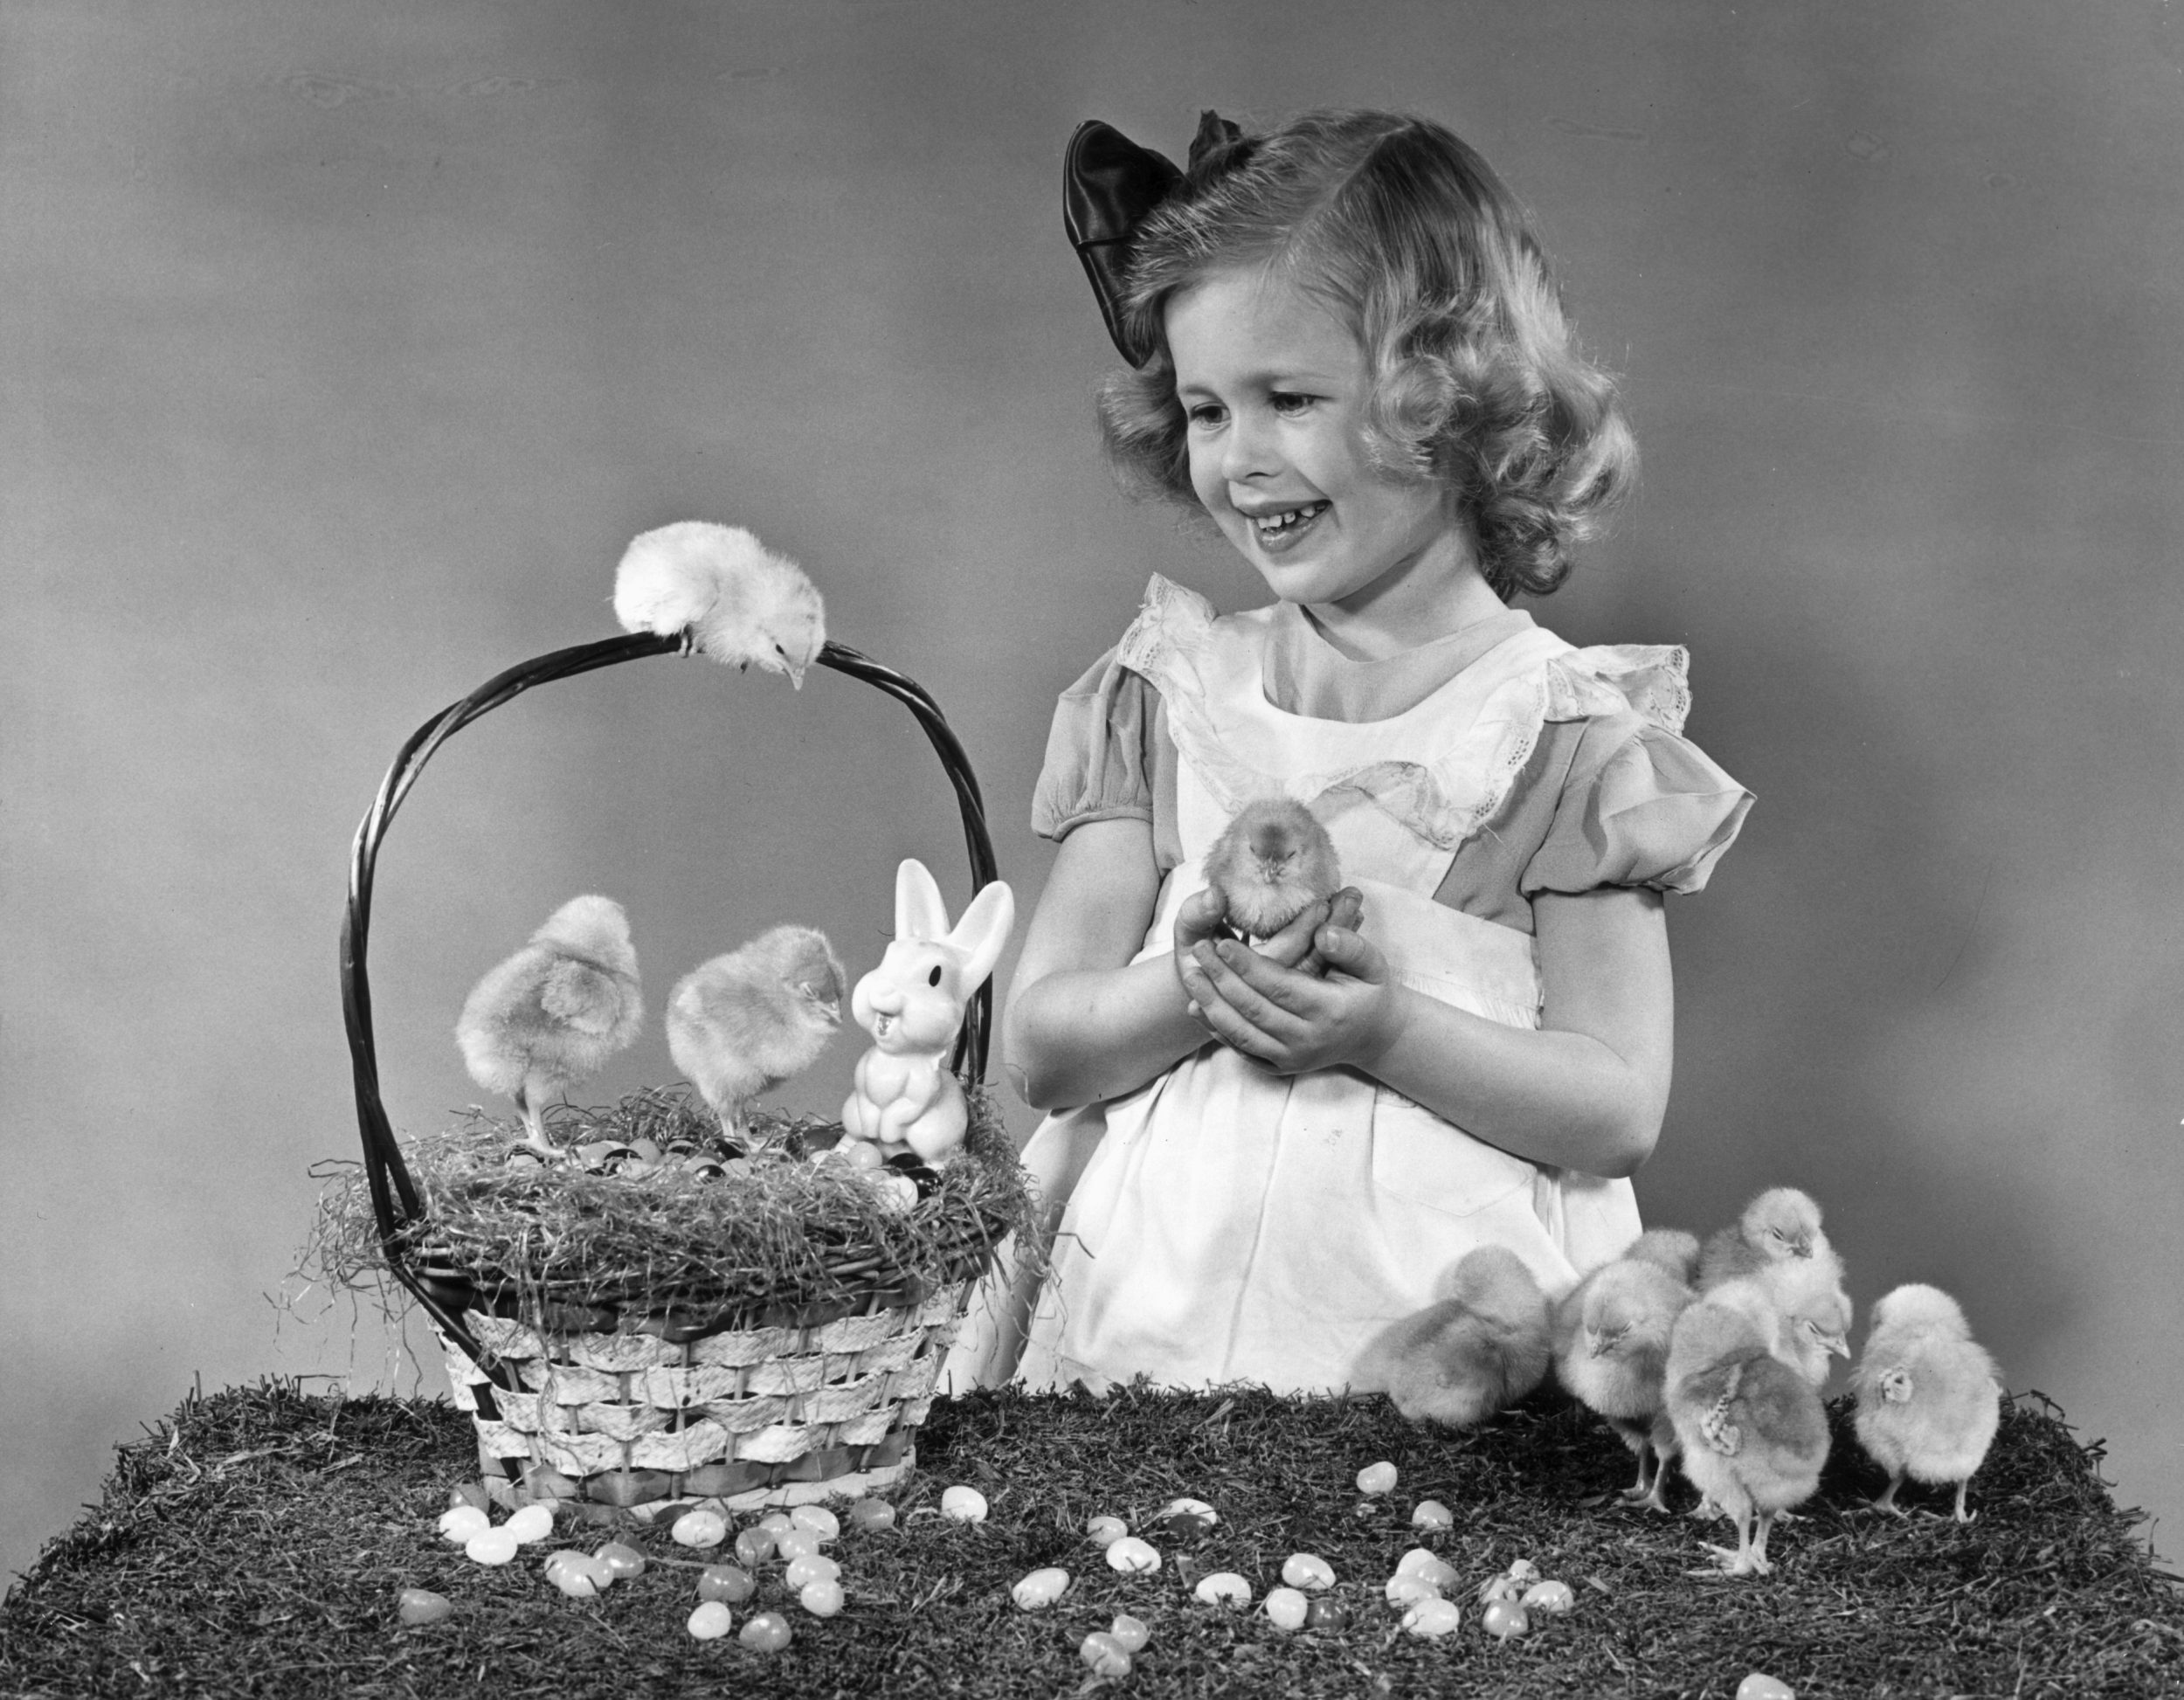 circa 1945: A young girl holds a chick beside a table with artificial grass, more chicks and a basket containing jelly beans and a bunny in an Easter portrait.